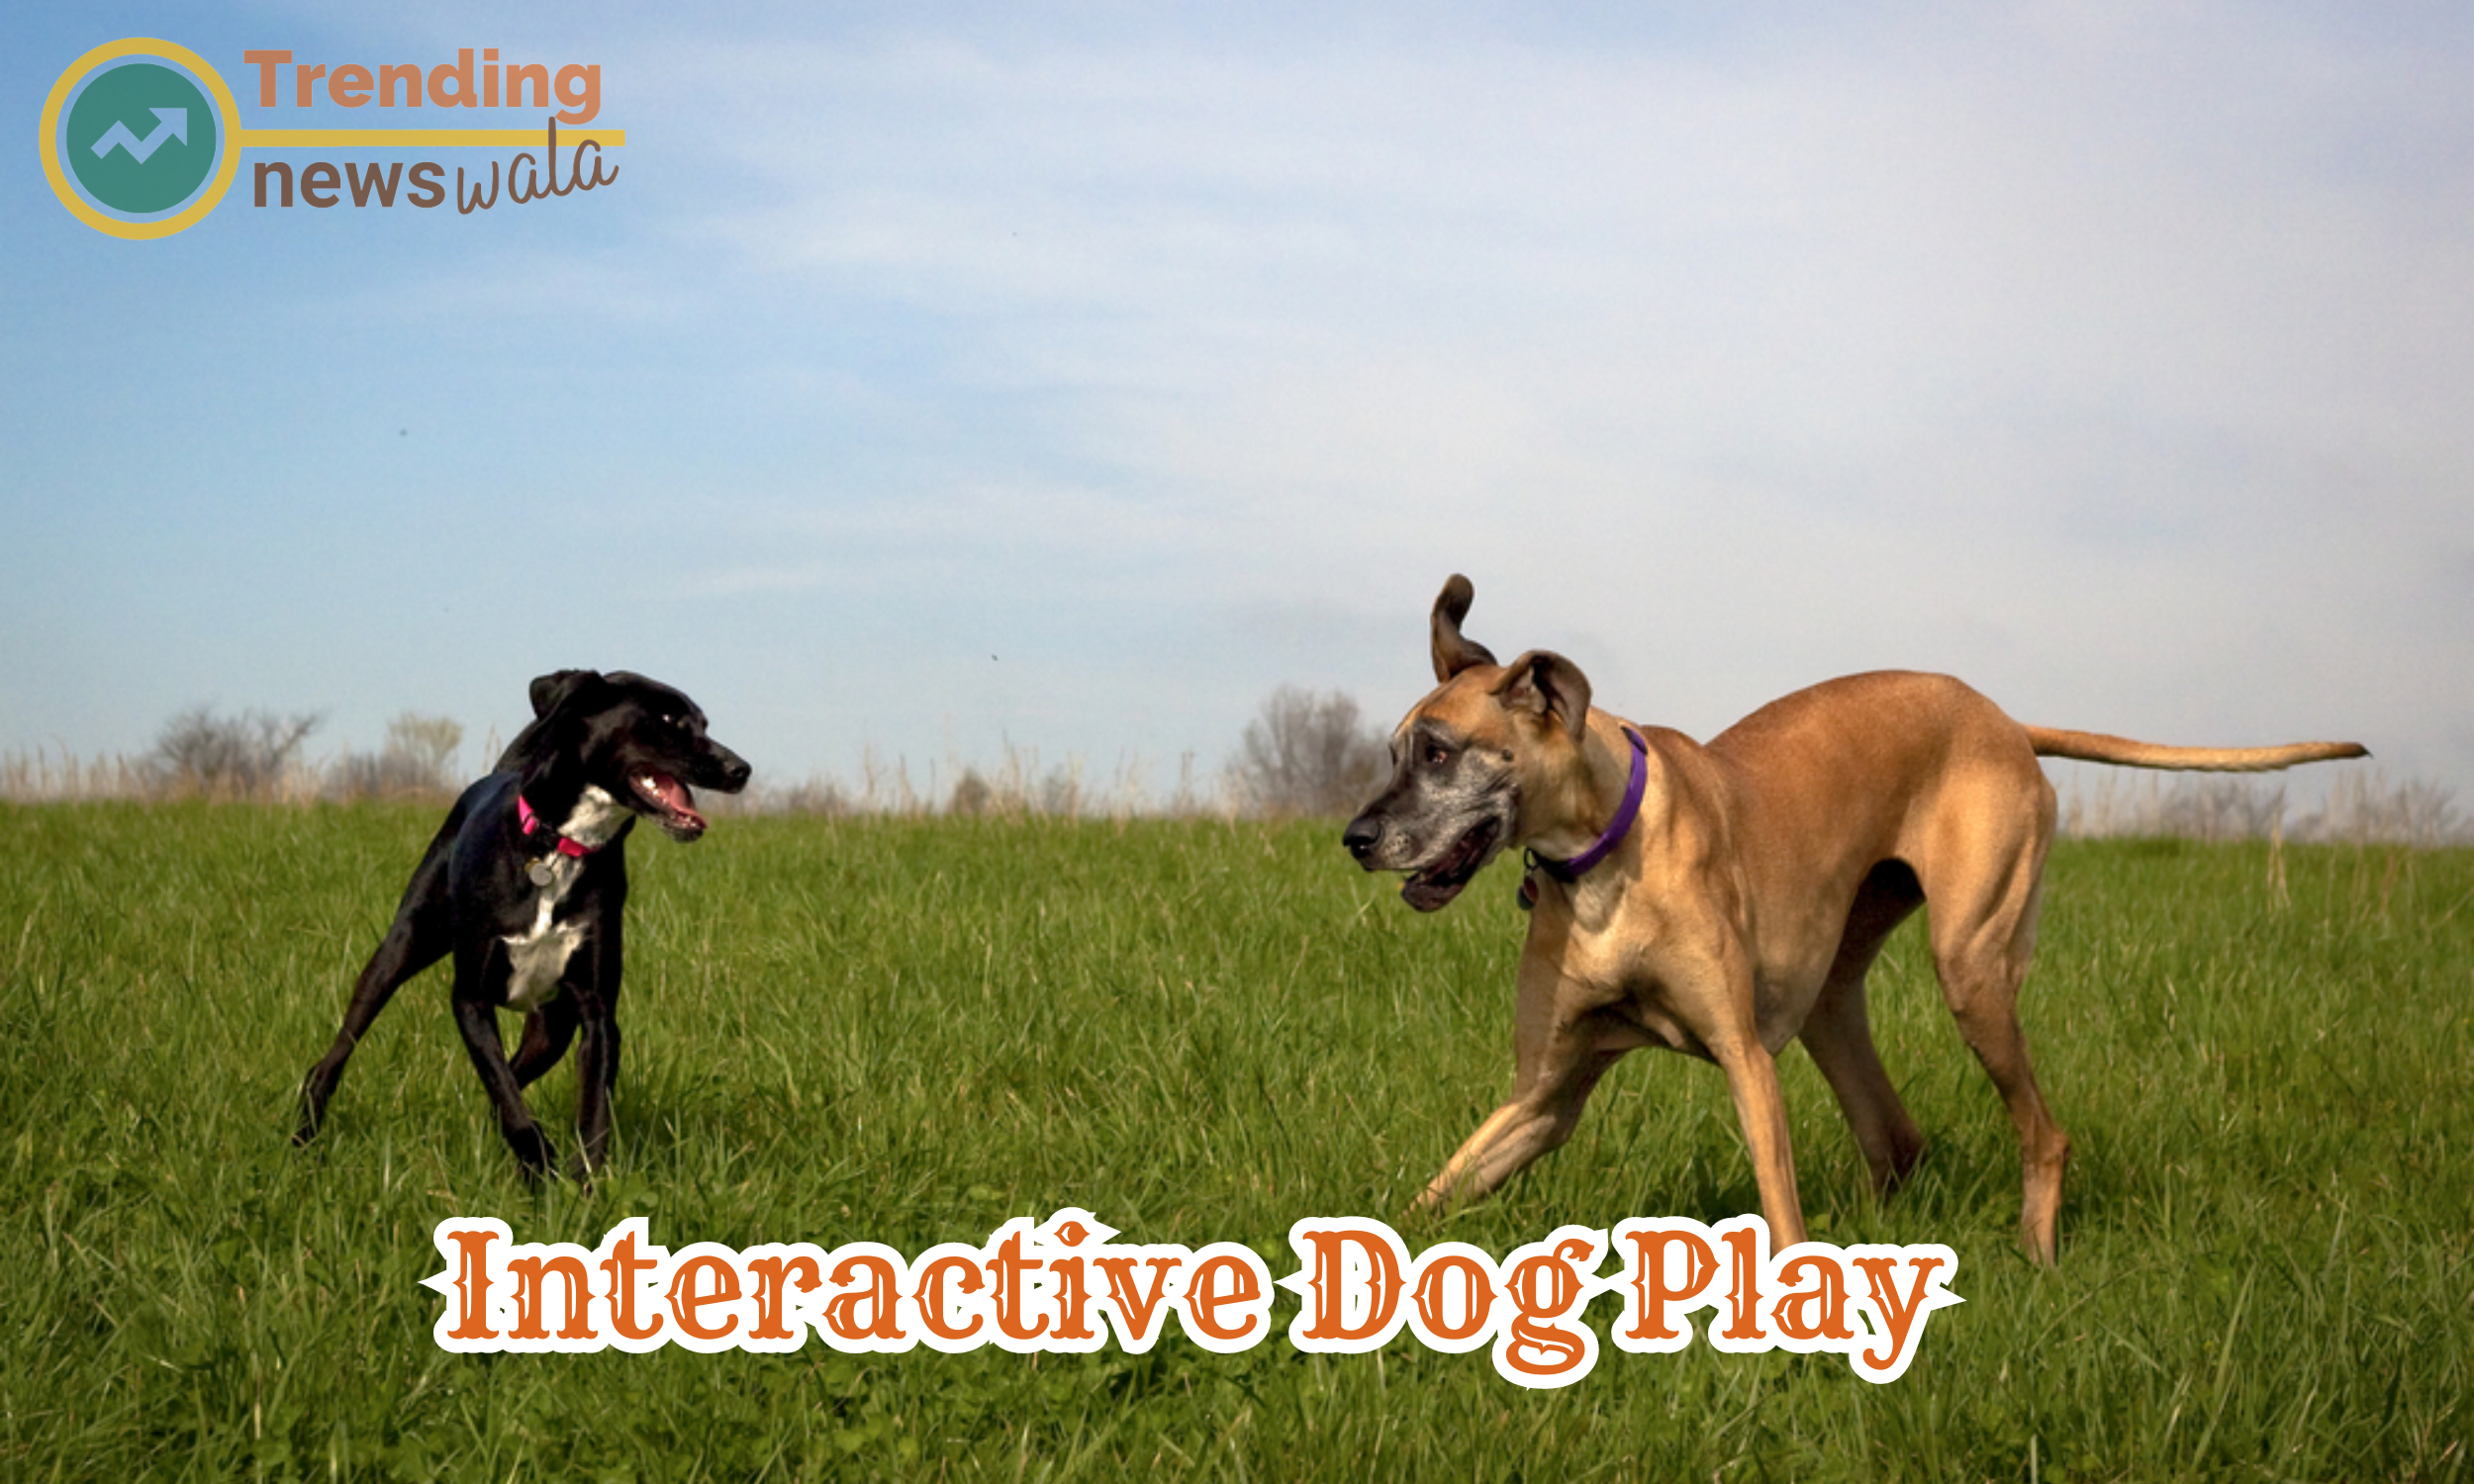 Interactive dog play involves engaging activities between you and your canine companion